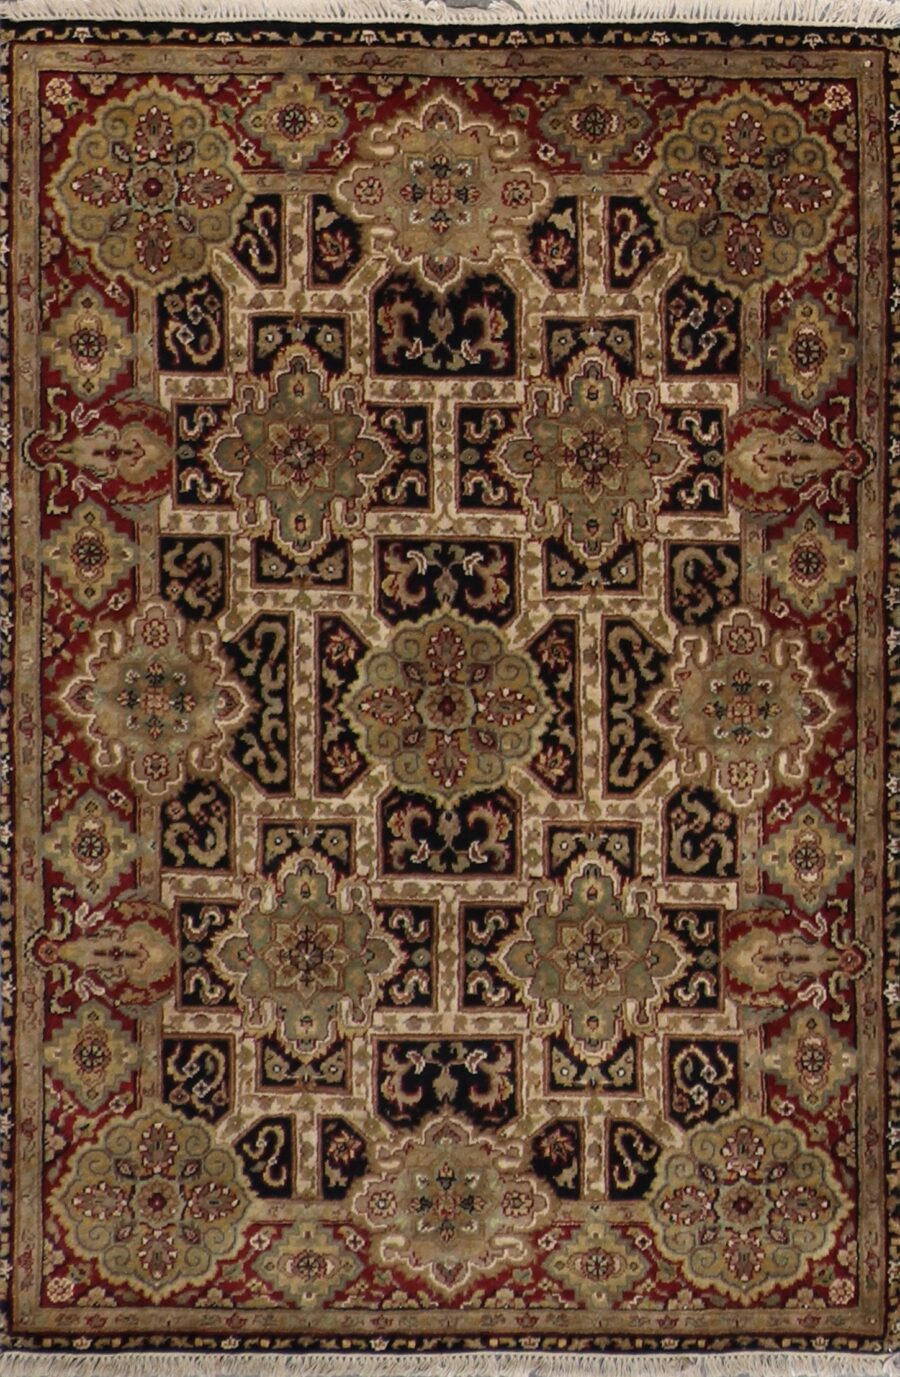 4’x6’2” Traditional Black, Red Wool Hand-Knotted Rug - Direct Rug Import | Rugs in Chicago, Indiana,South Bend,Granger